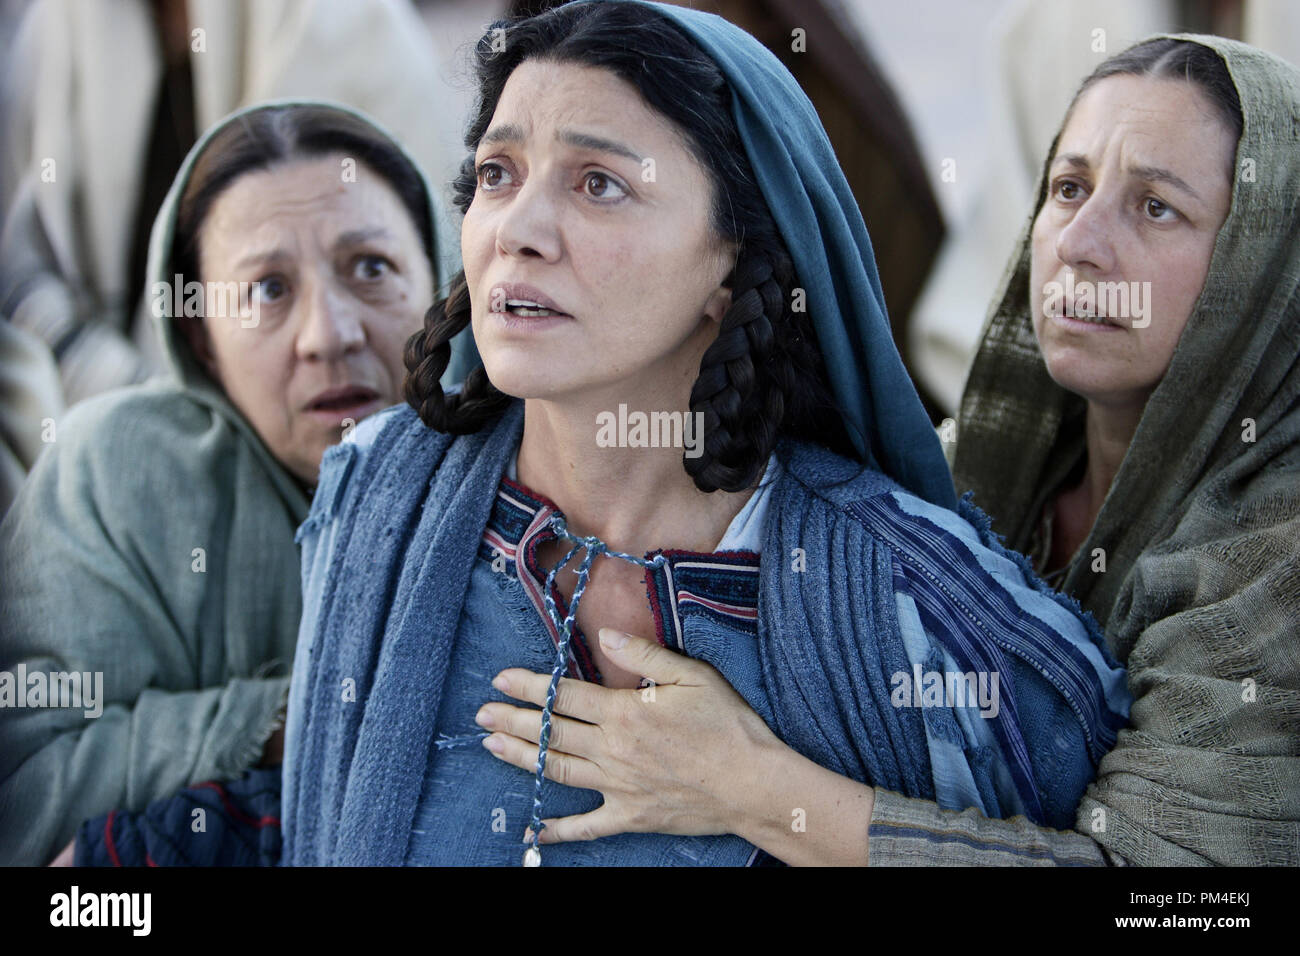 Film Still / Publicity Still from 'The Nativity Story' Shohreh Aghdashloo © 2006 New Line Cinema Photo Credit: Jaimie Trueblood .  File Reference # 30737959THA  For Editorial Use Only -  All Rights Reserved Stock Photo